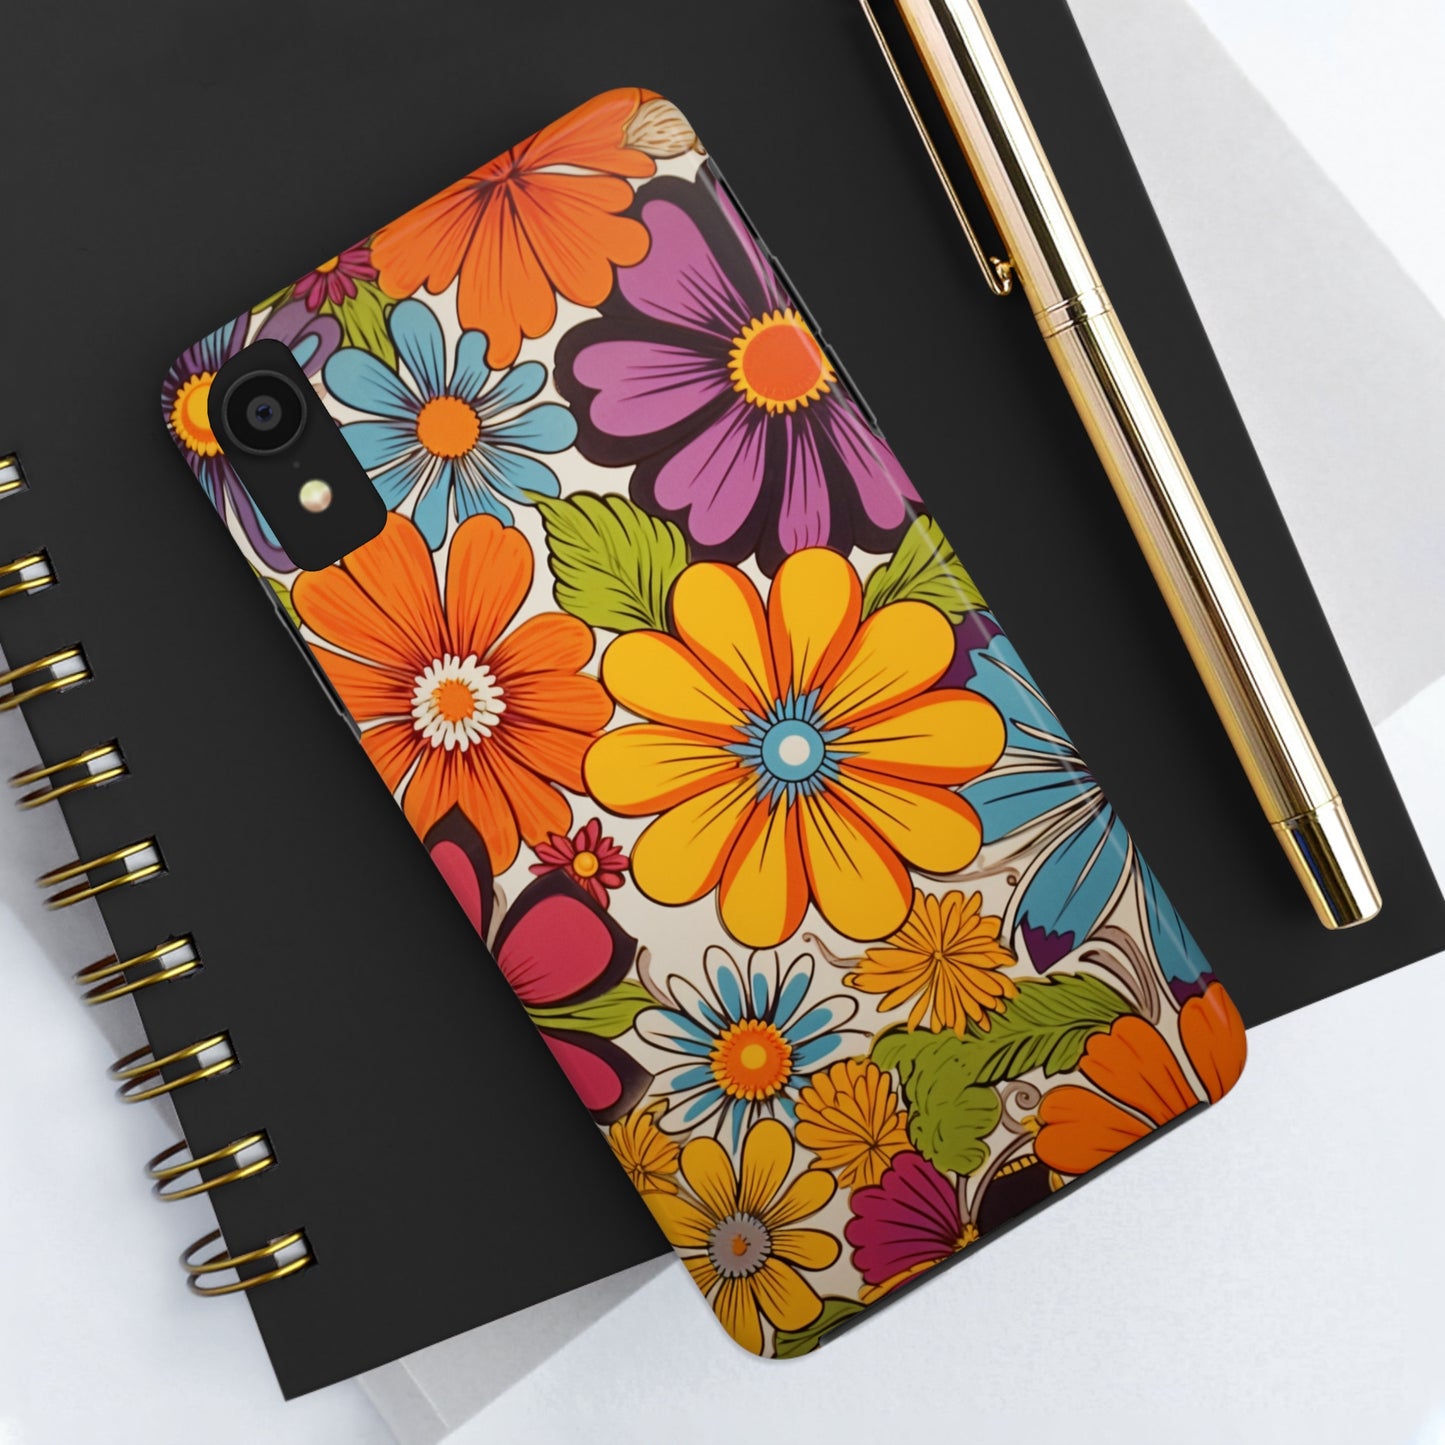 Groovy Garden: Trippy Hippie Psychedelic Floral Delights | Tough iPhone Case